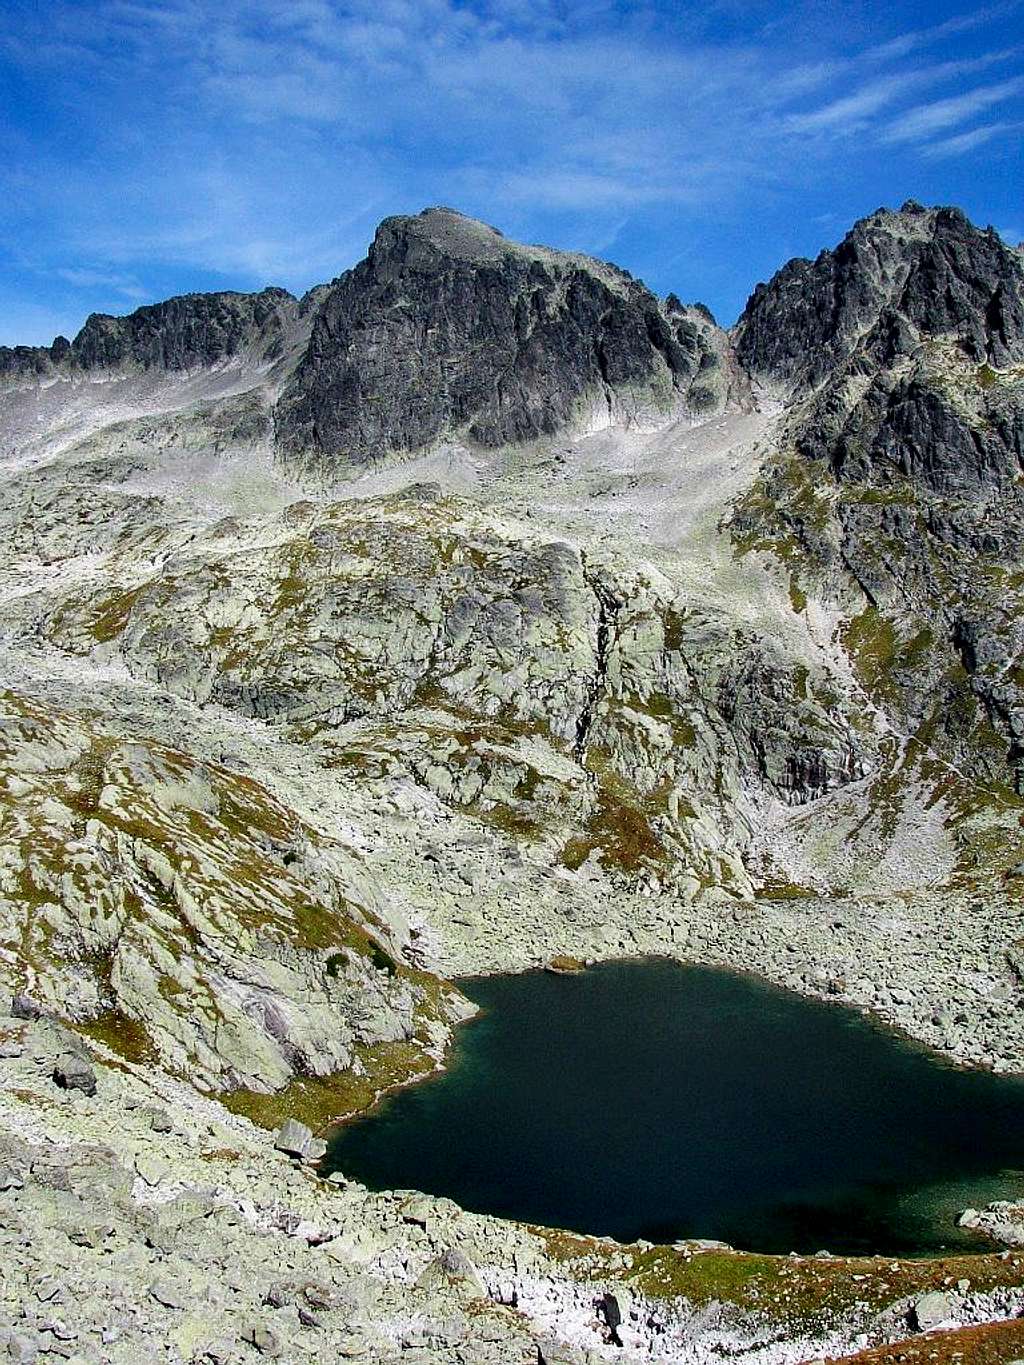 Typical post - glacial landscape of High Tatras